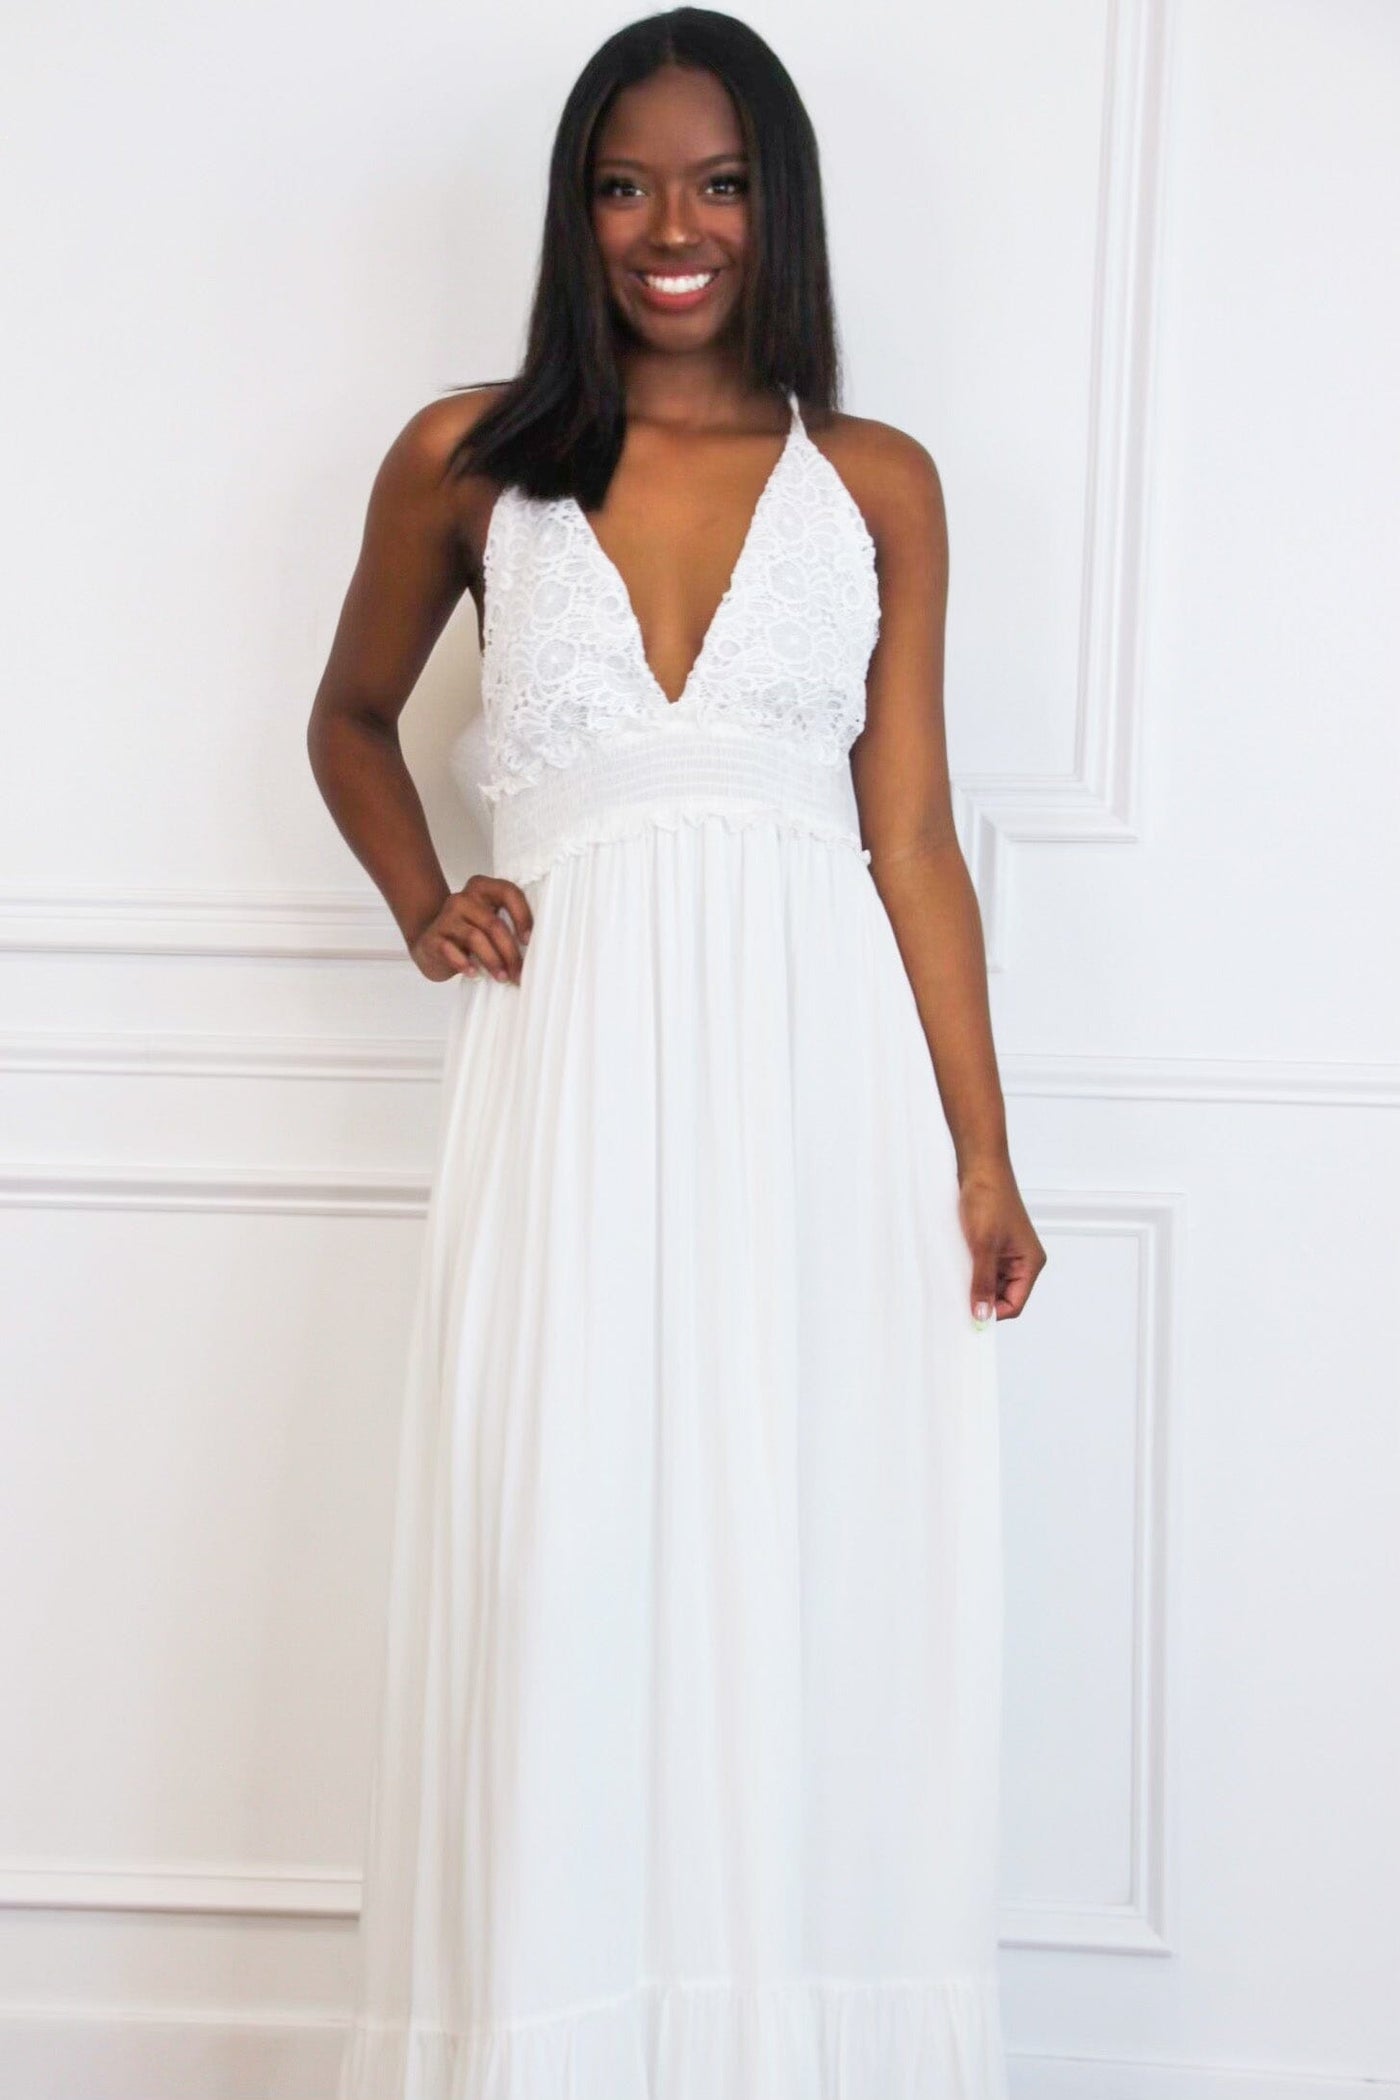 Heart First Lace Maxi Dress: White - Bella and Bloom Boutique